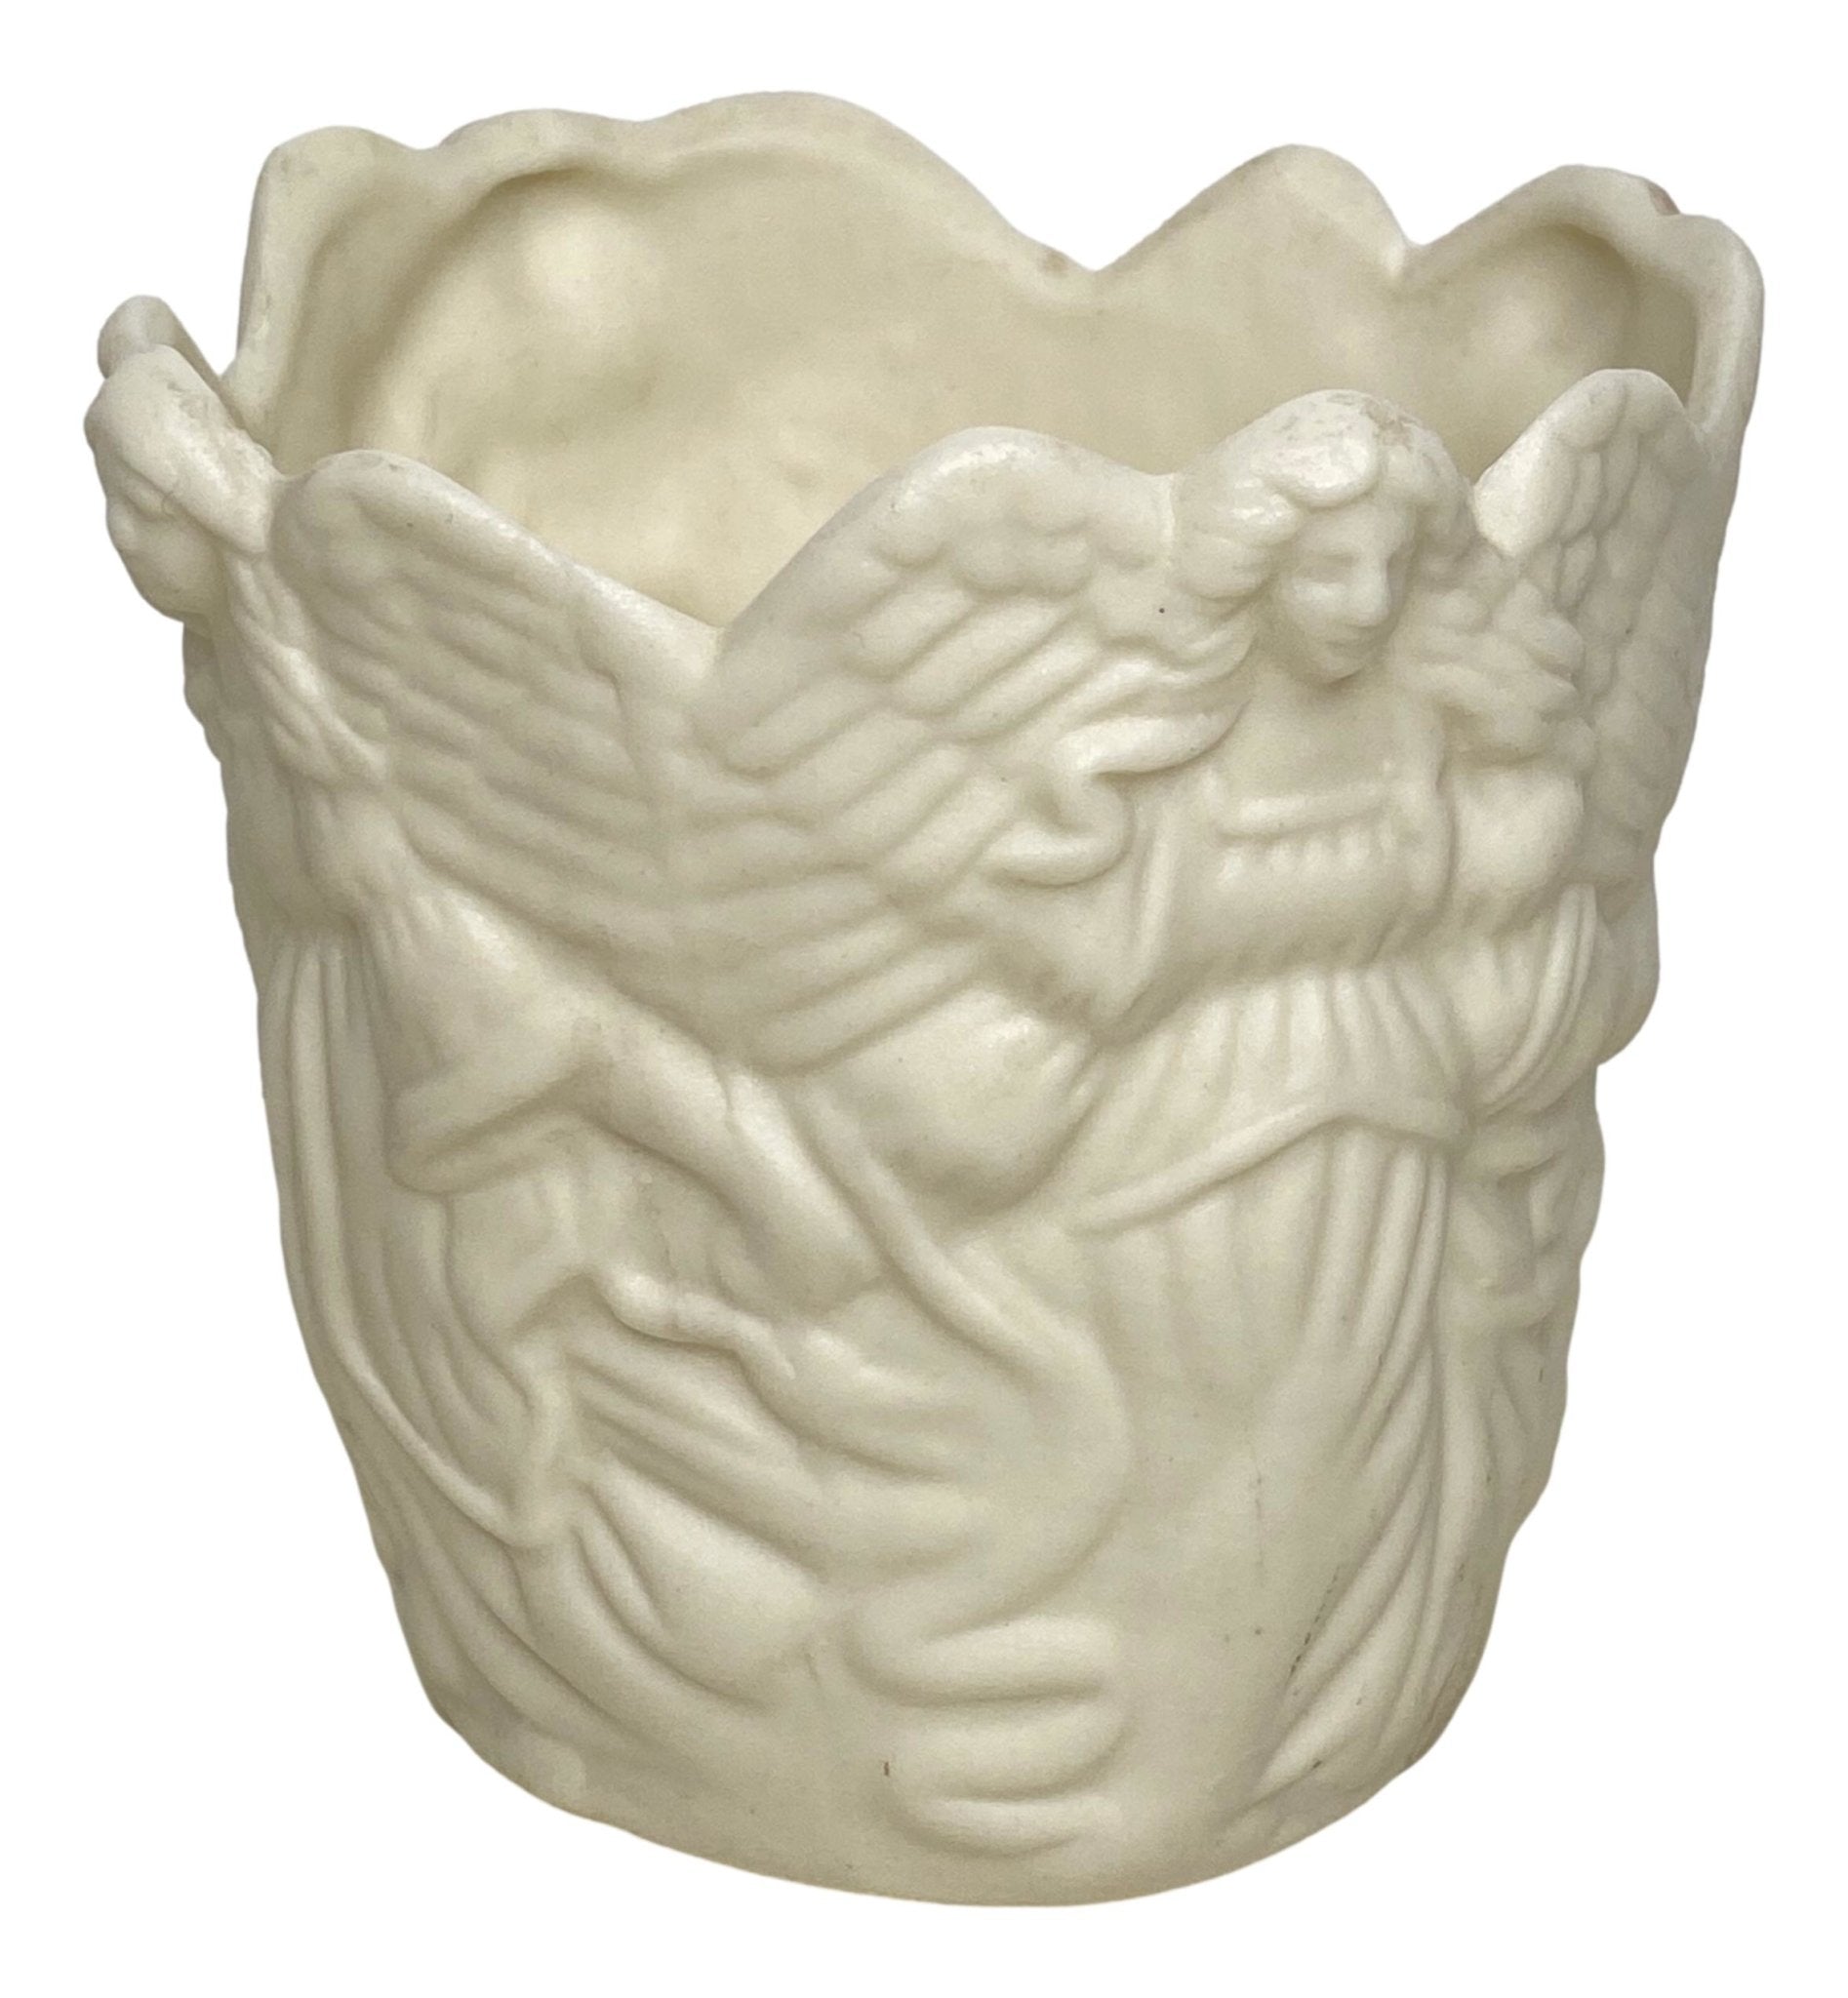 Candle Holder Bisque Ceramic Angels 2 3/4 W x 3 H Inches - Ysleta Mission Gift Shop- VOTED 2022 El Paso's Best Gift Shop